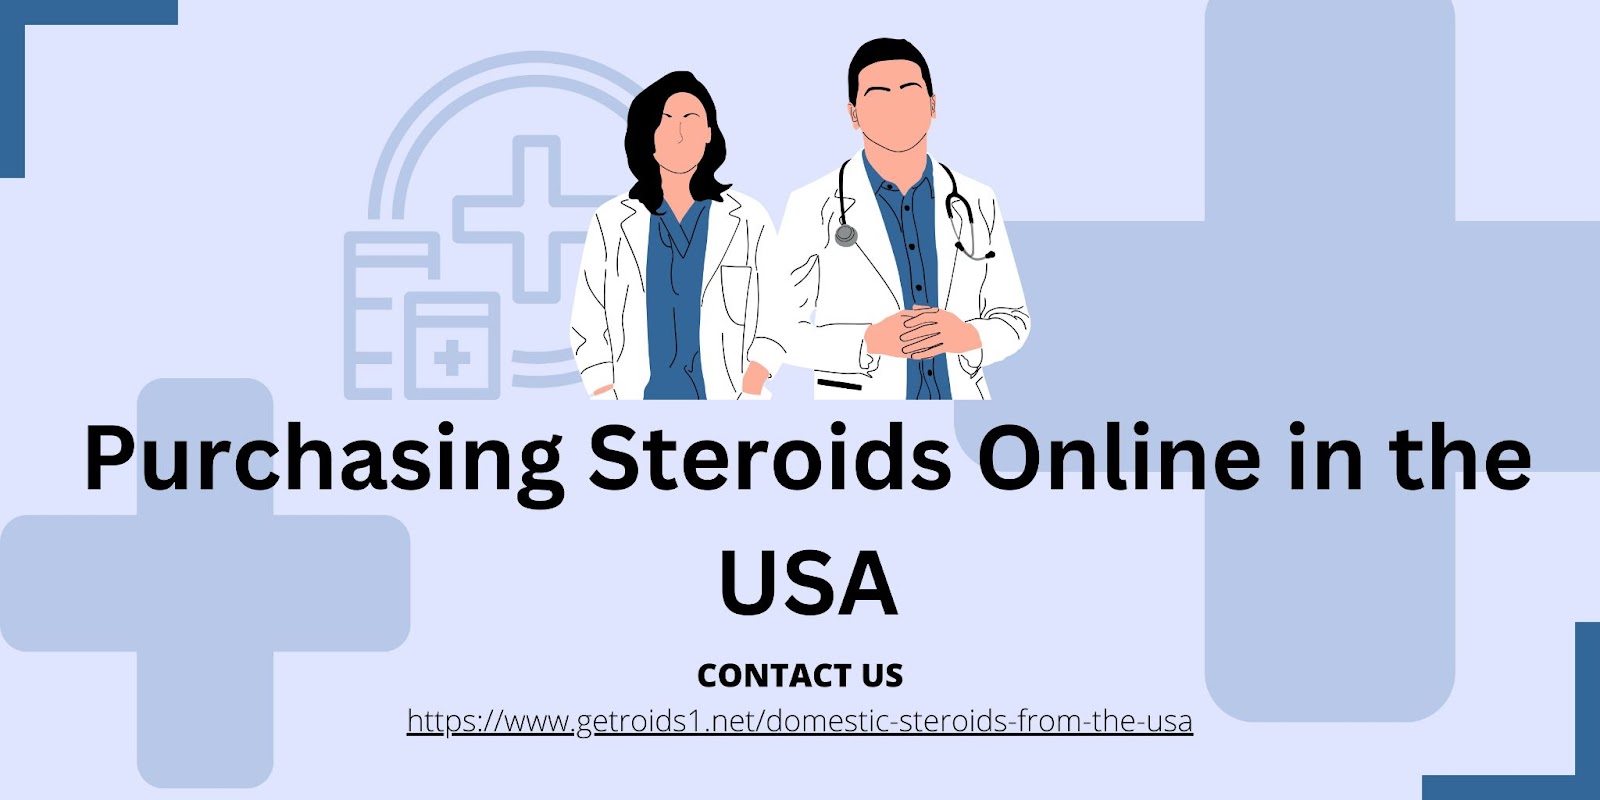 Purchasing Steroids Online in the USA